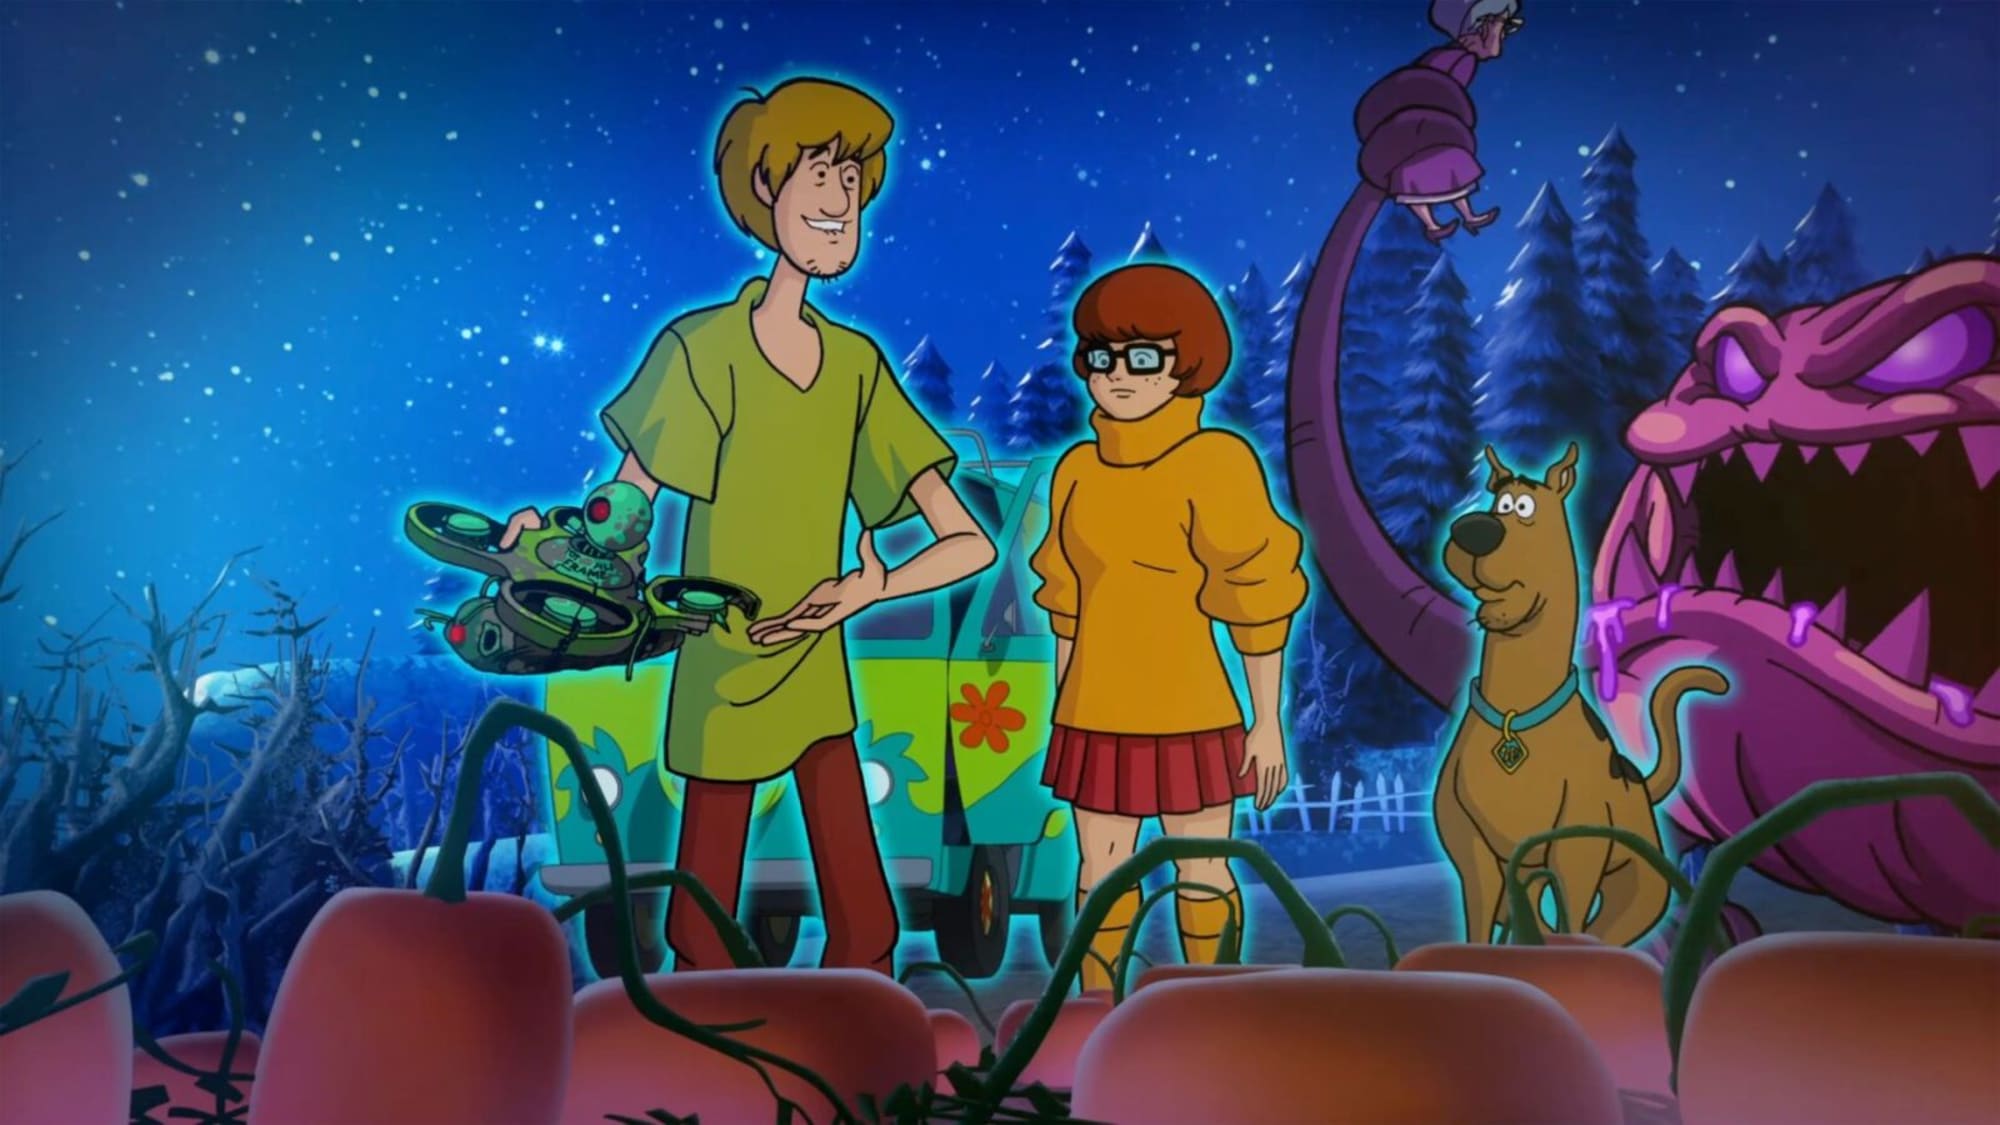 Live-Action Scooby Doo Origin Movie 'Daphne and Velma' Coming in 2018